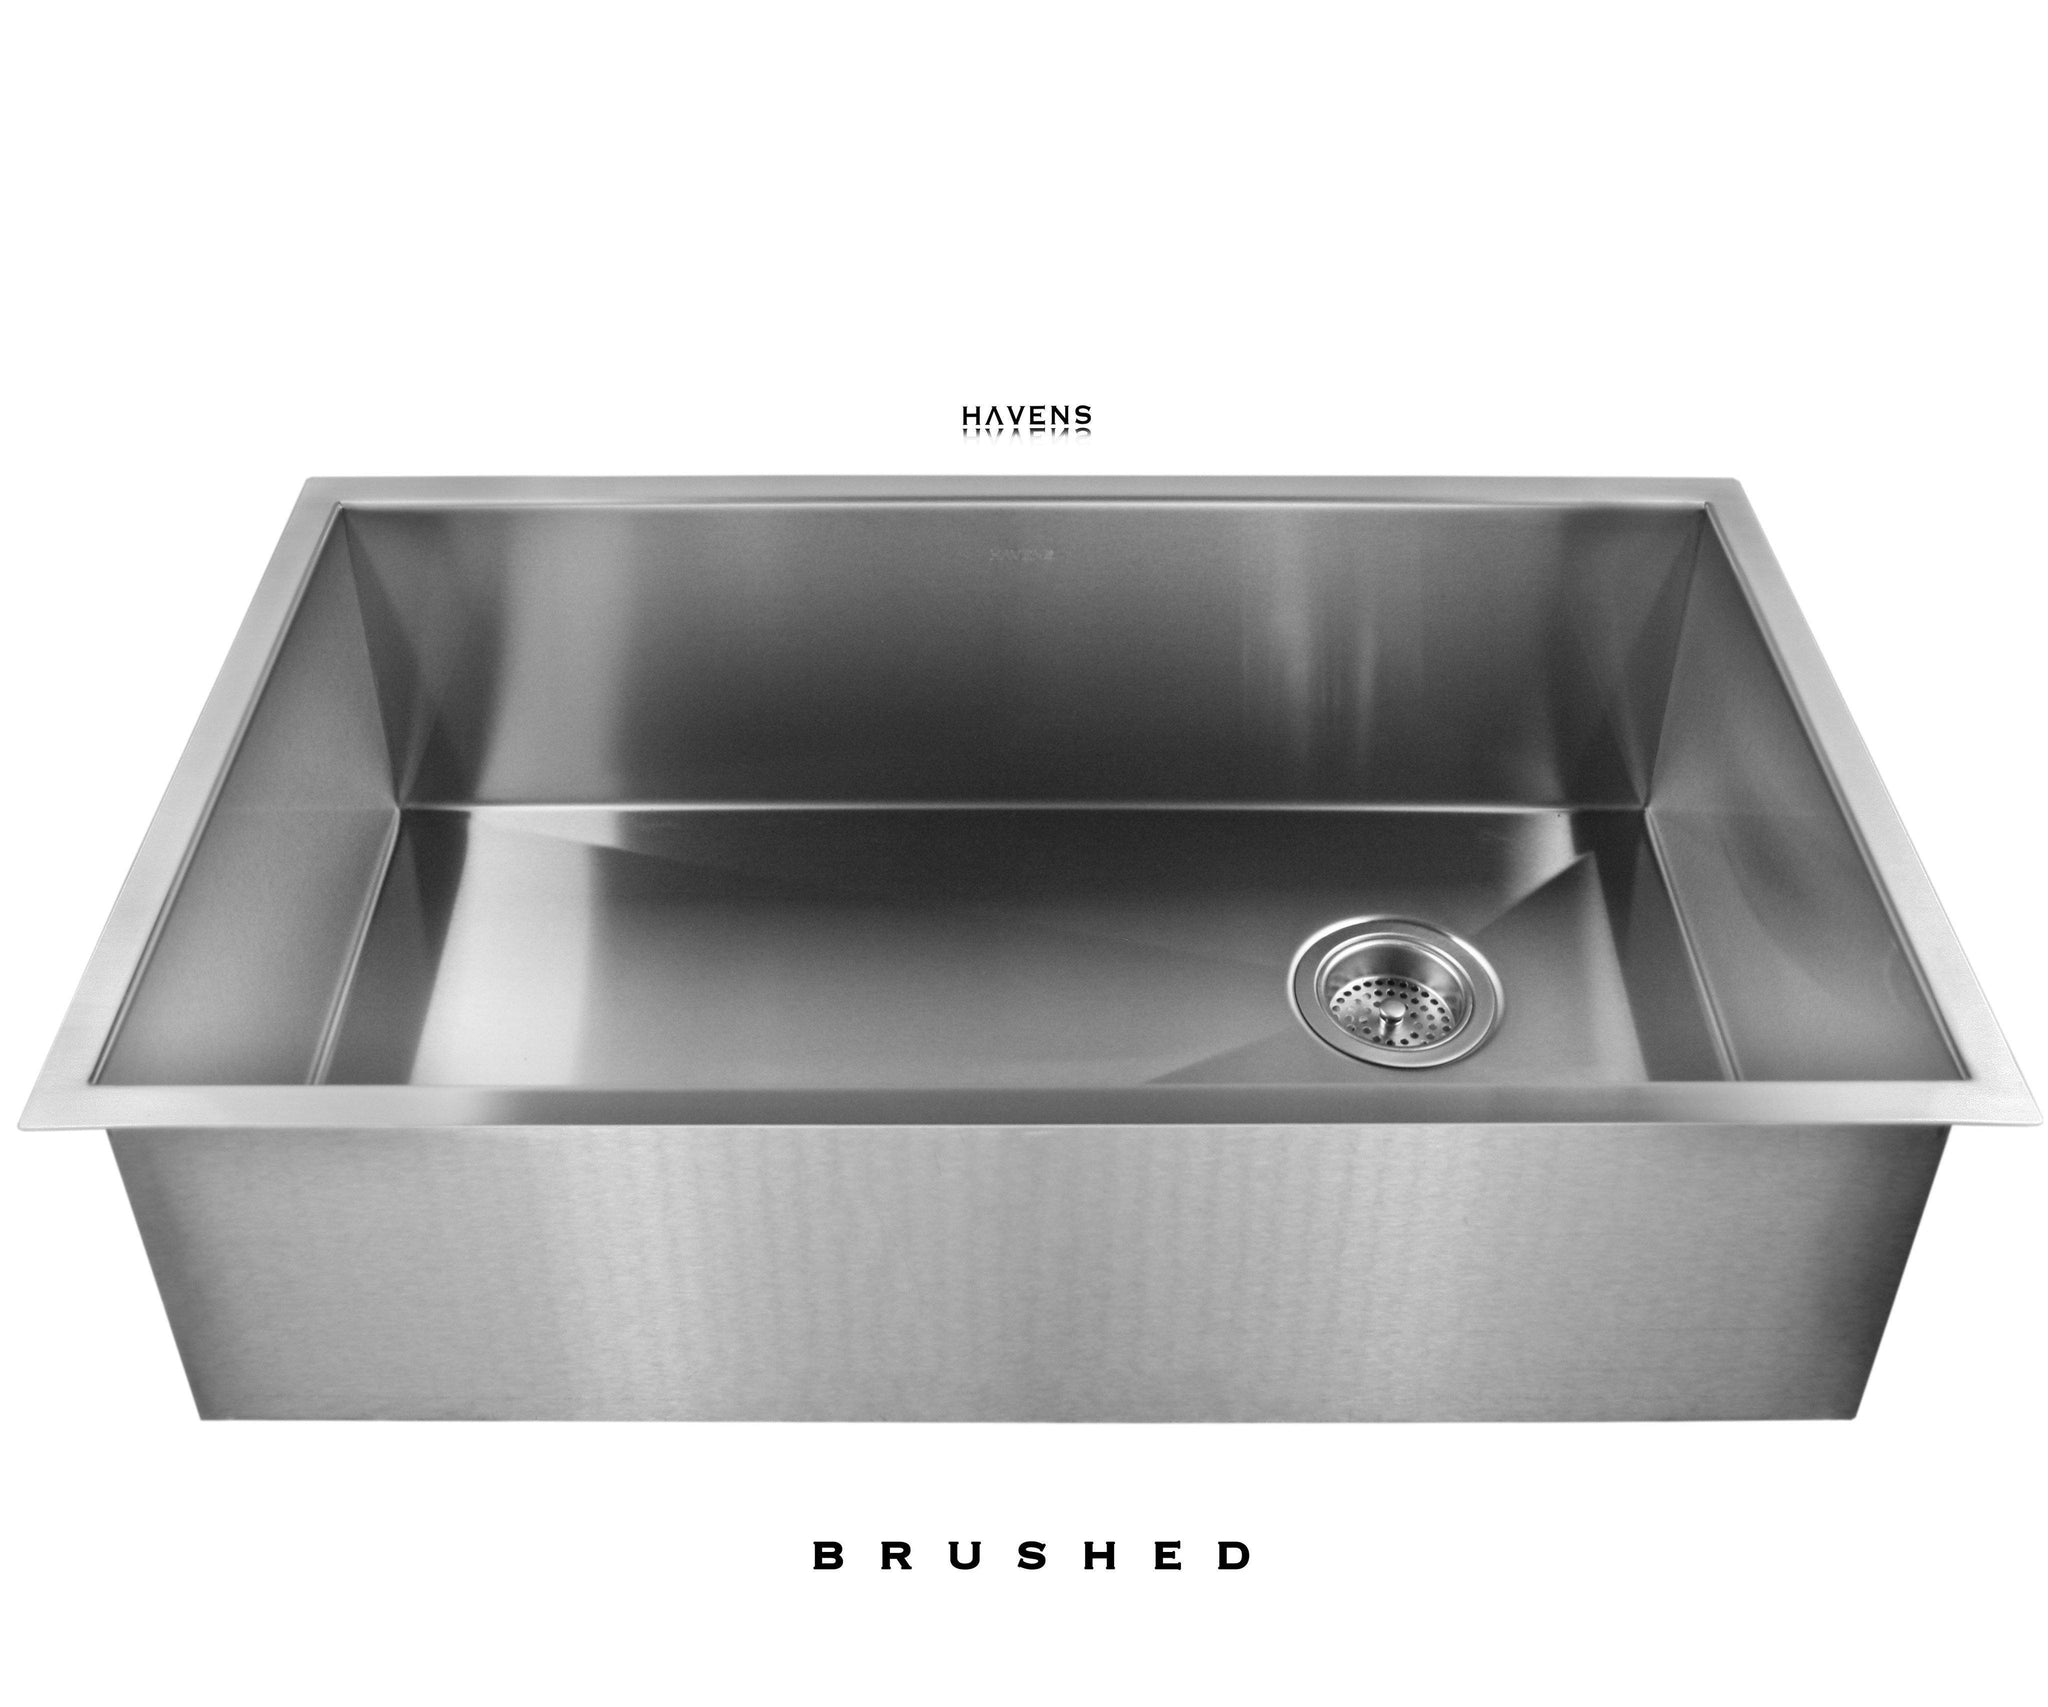 Heritage Undermount Sink Brushed Stainless